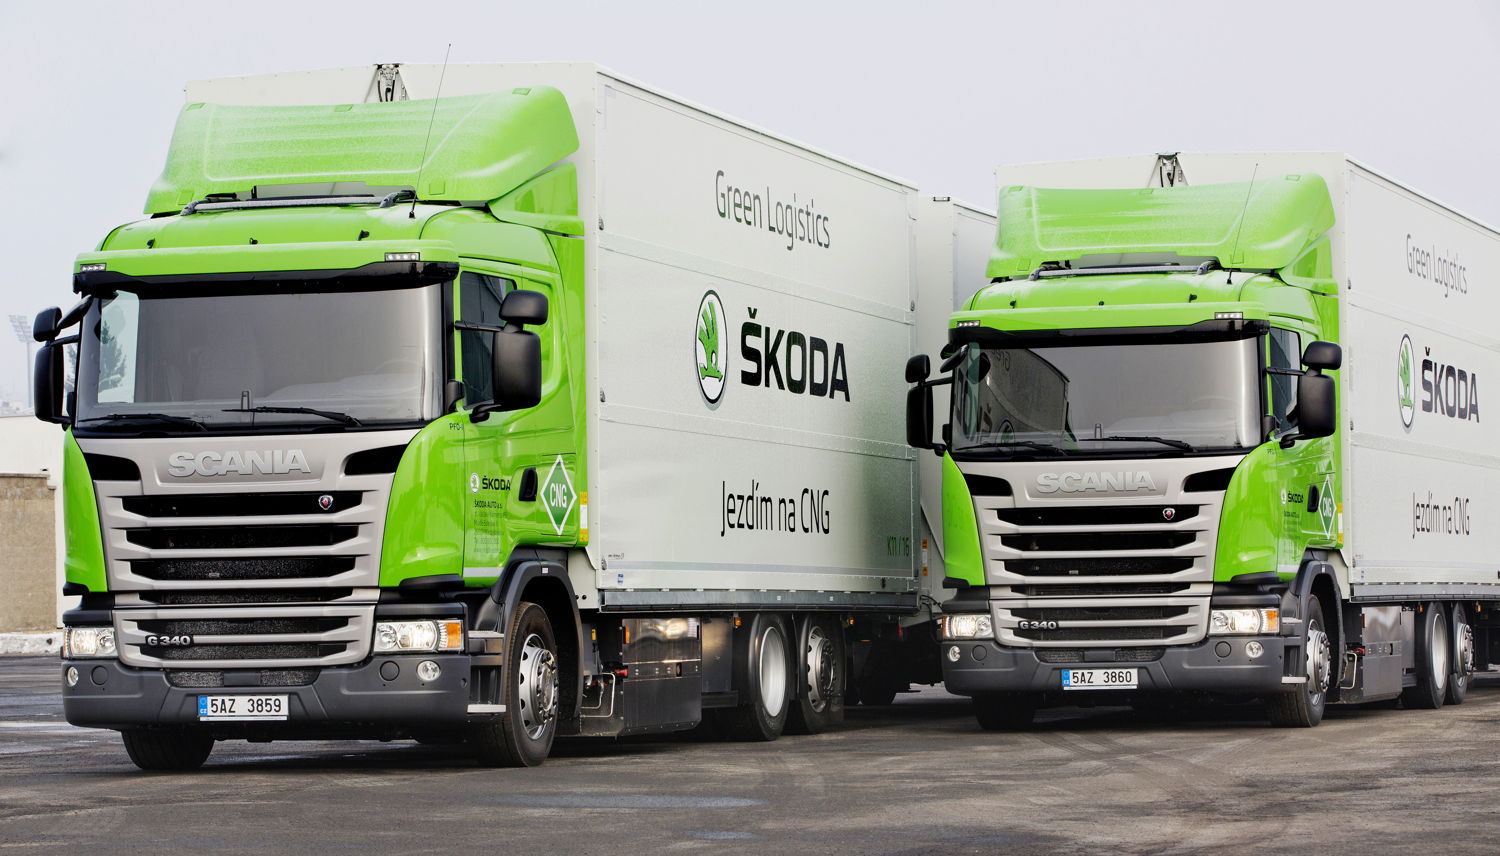 ŠKODA further expands its environmentally friendly logistics fleet and puts four CNG-powered lorries (CNG = compressed natural gas) into service at the main plant in Mladá Boleslav.